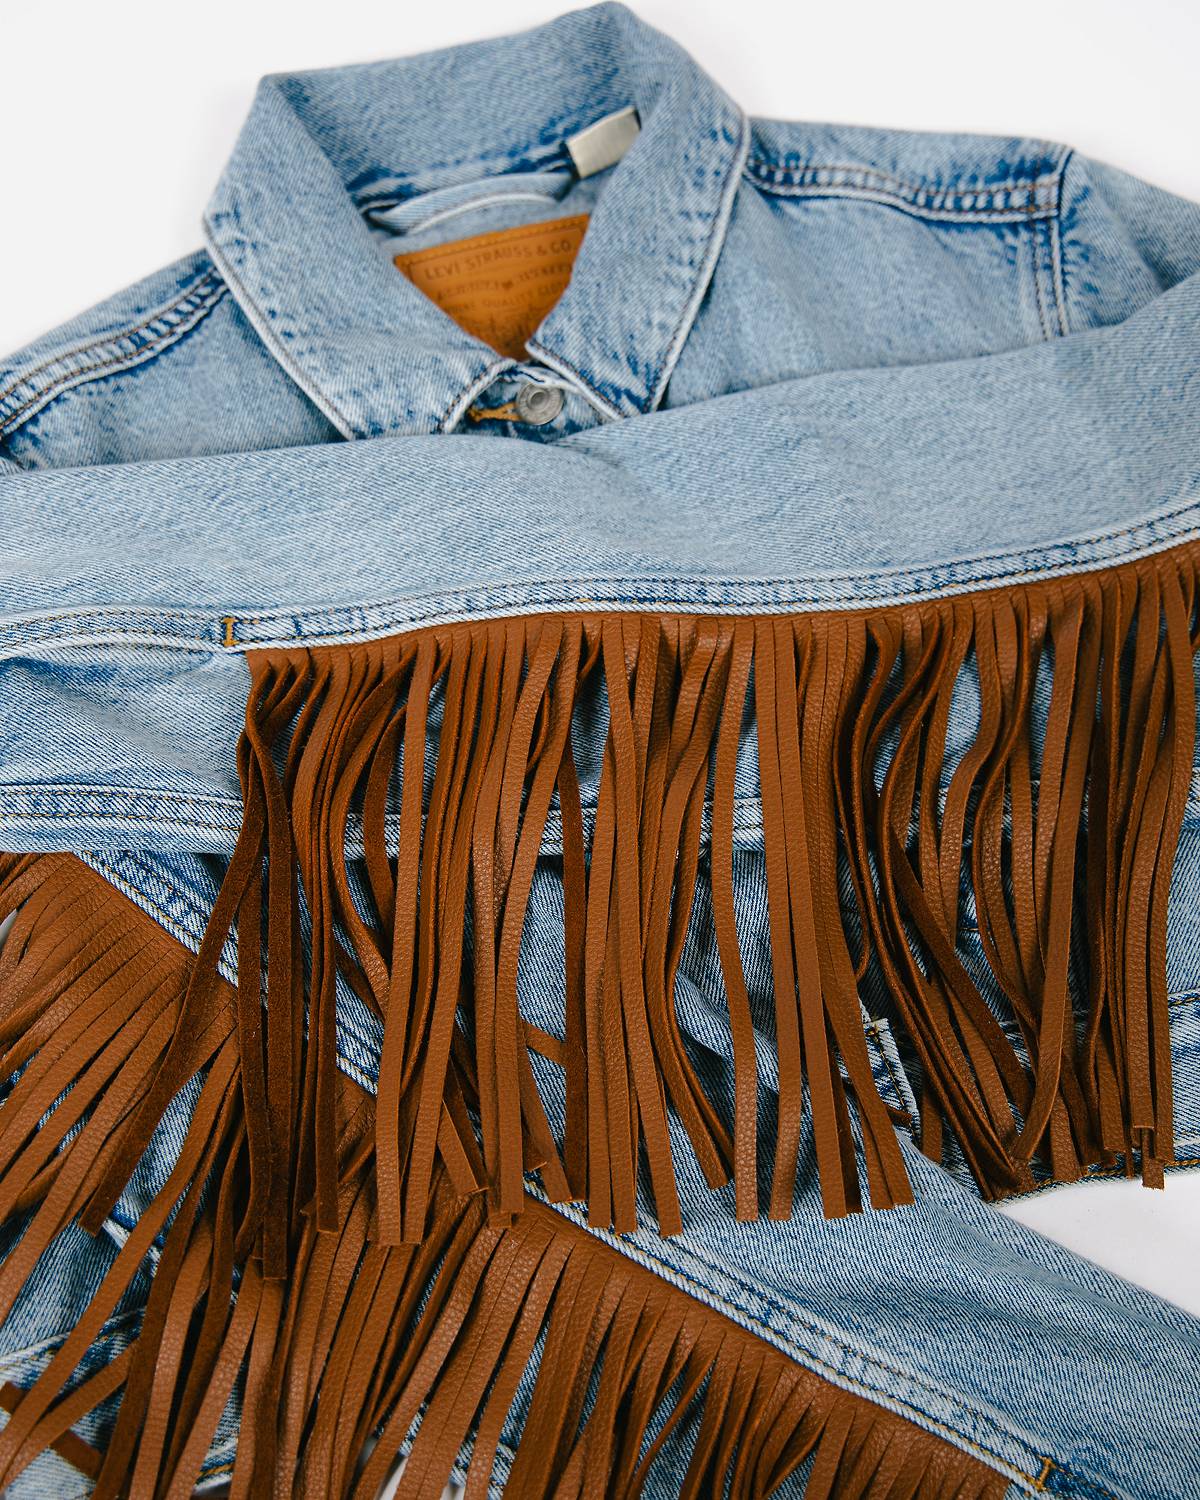 Customized Levi's® Trucker Jacket with brown fringe detailing on the sleeves